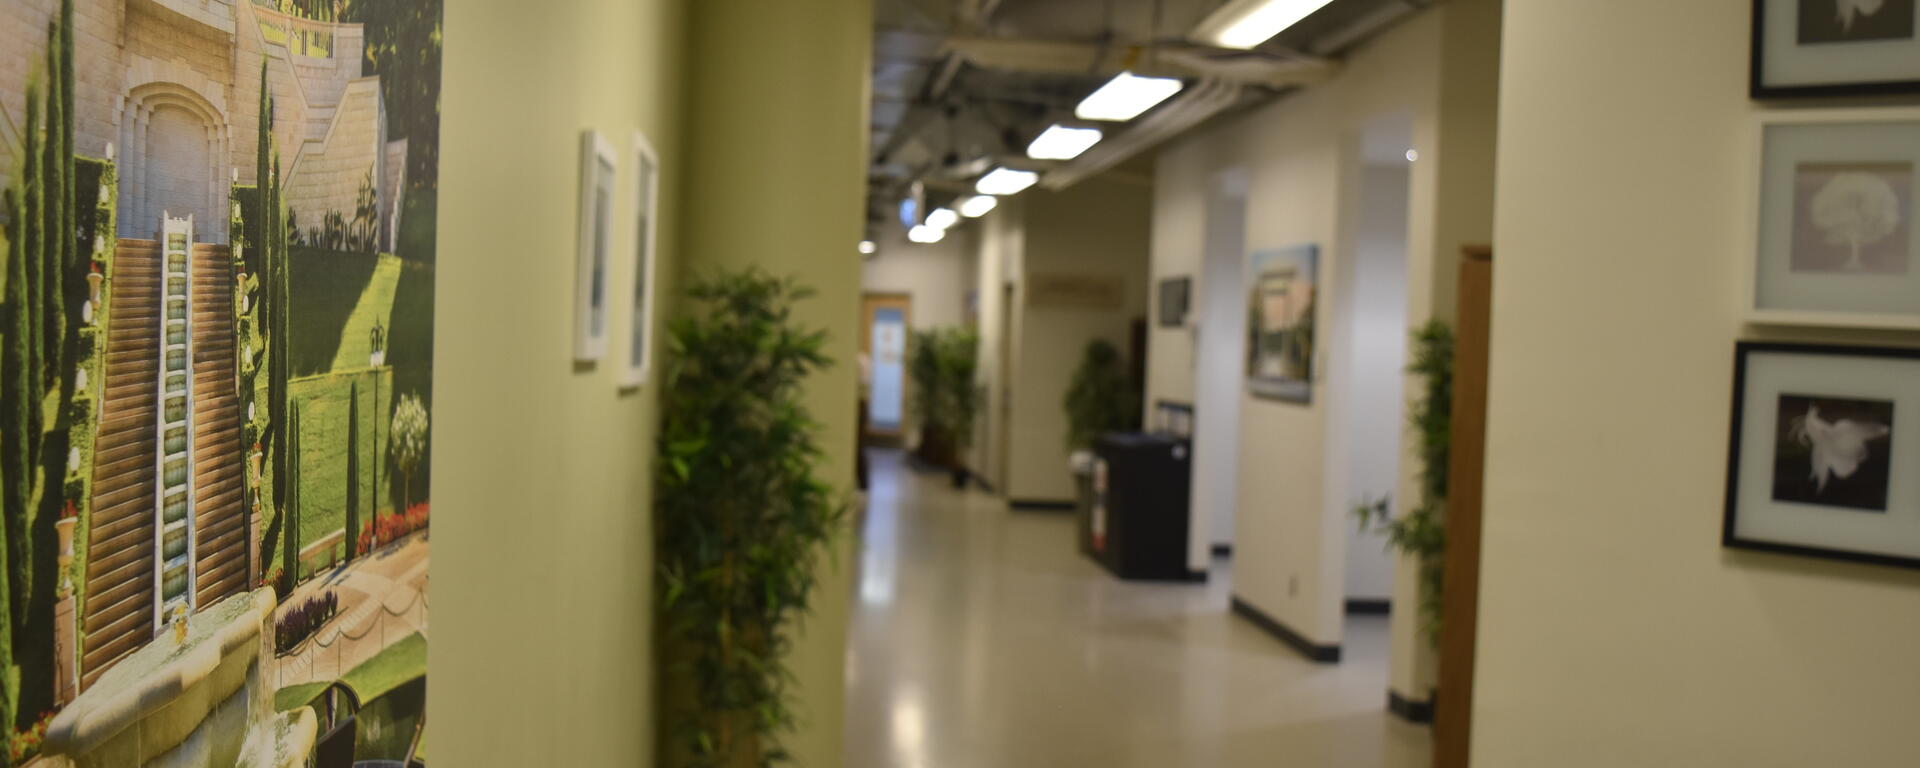 long hallway with plants, paintings and doors